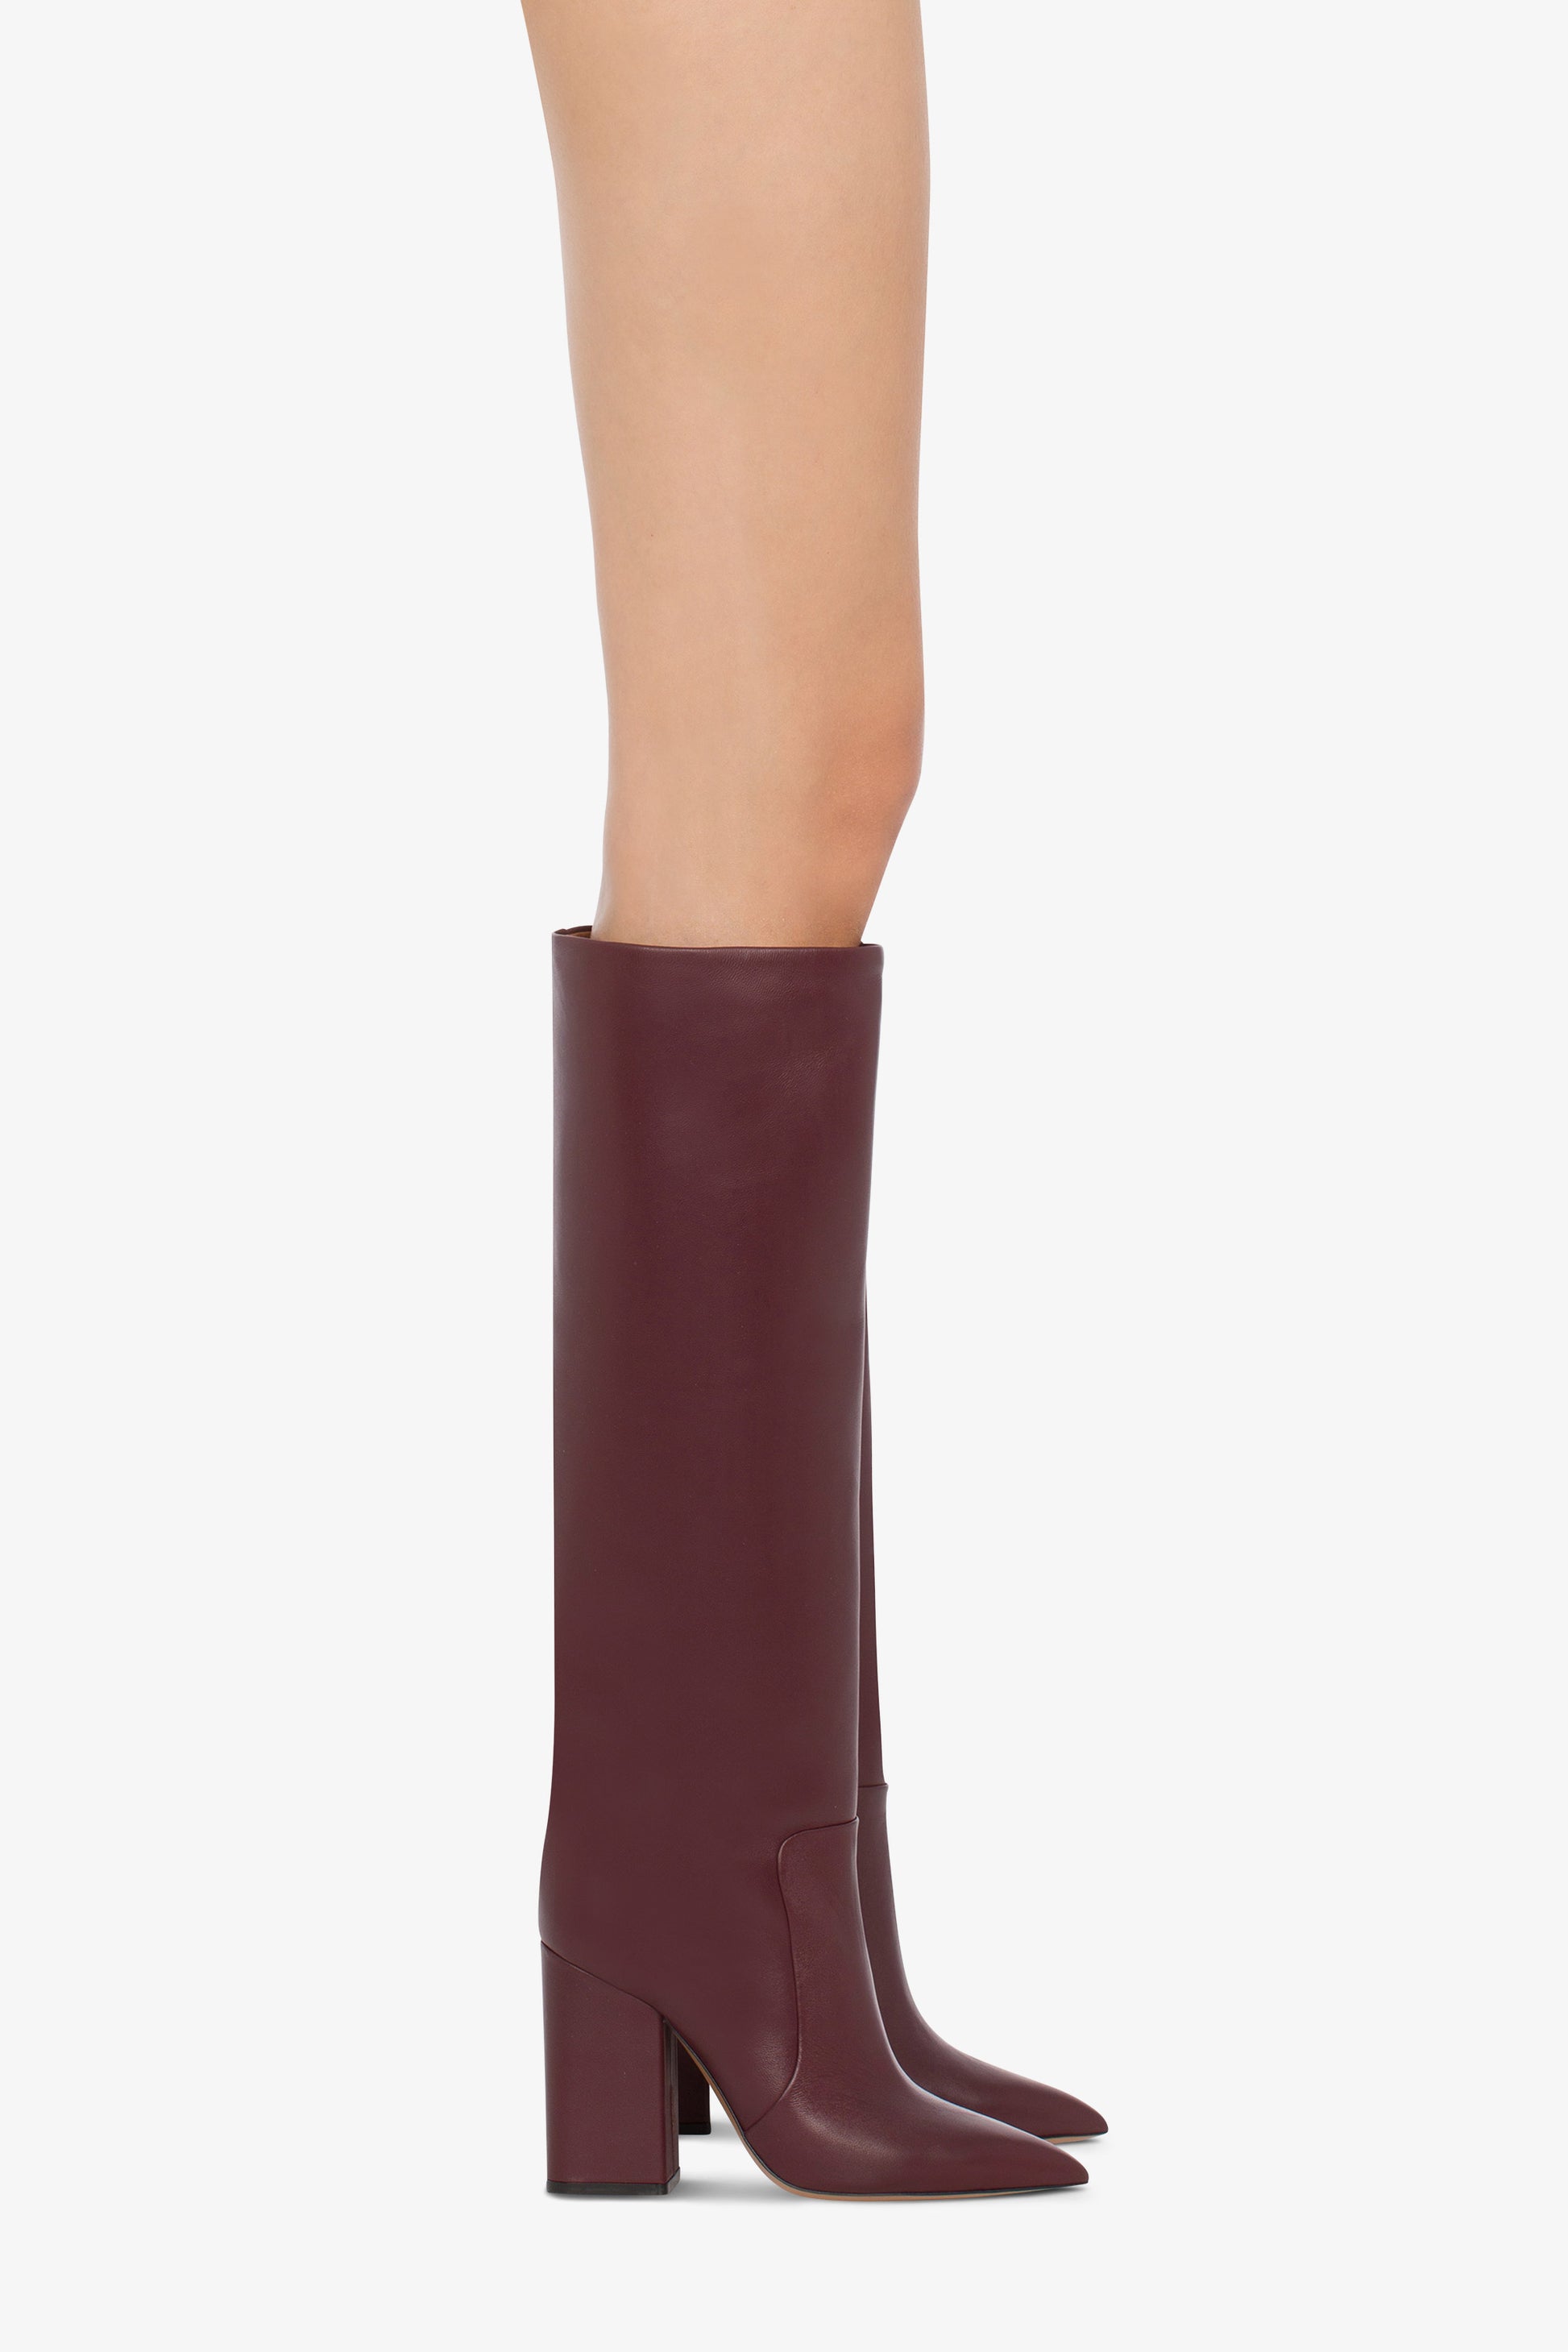 Knee-high boots in smooth burgundy leather - Indossato